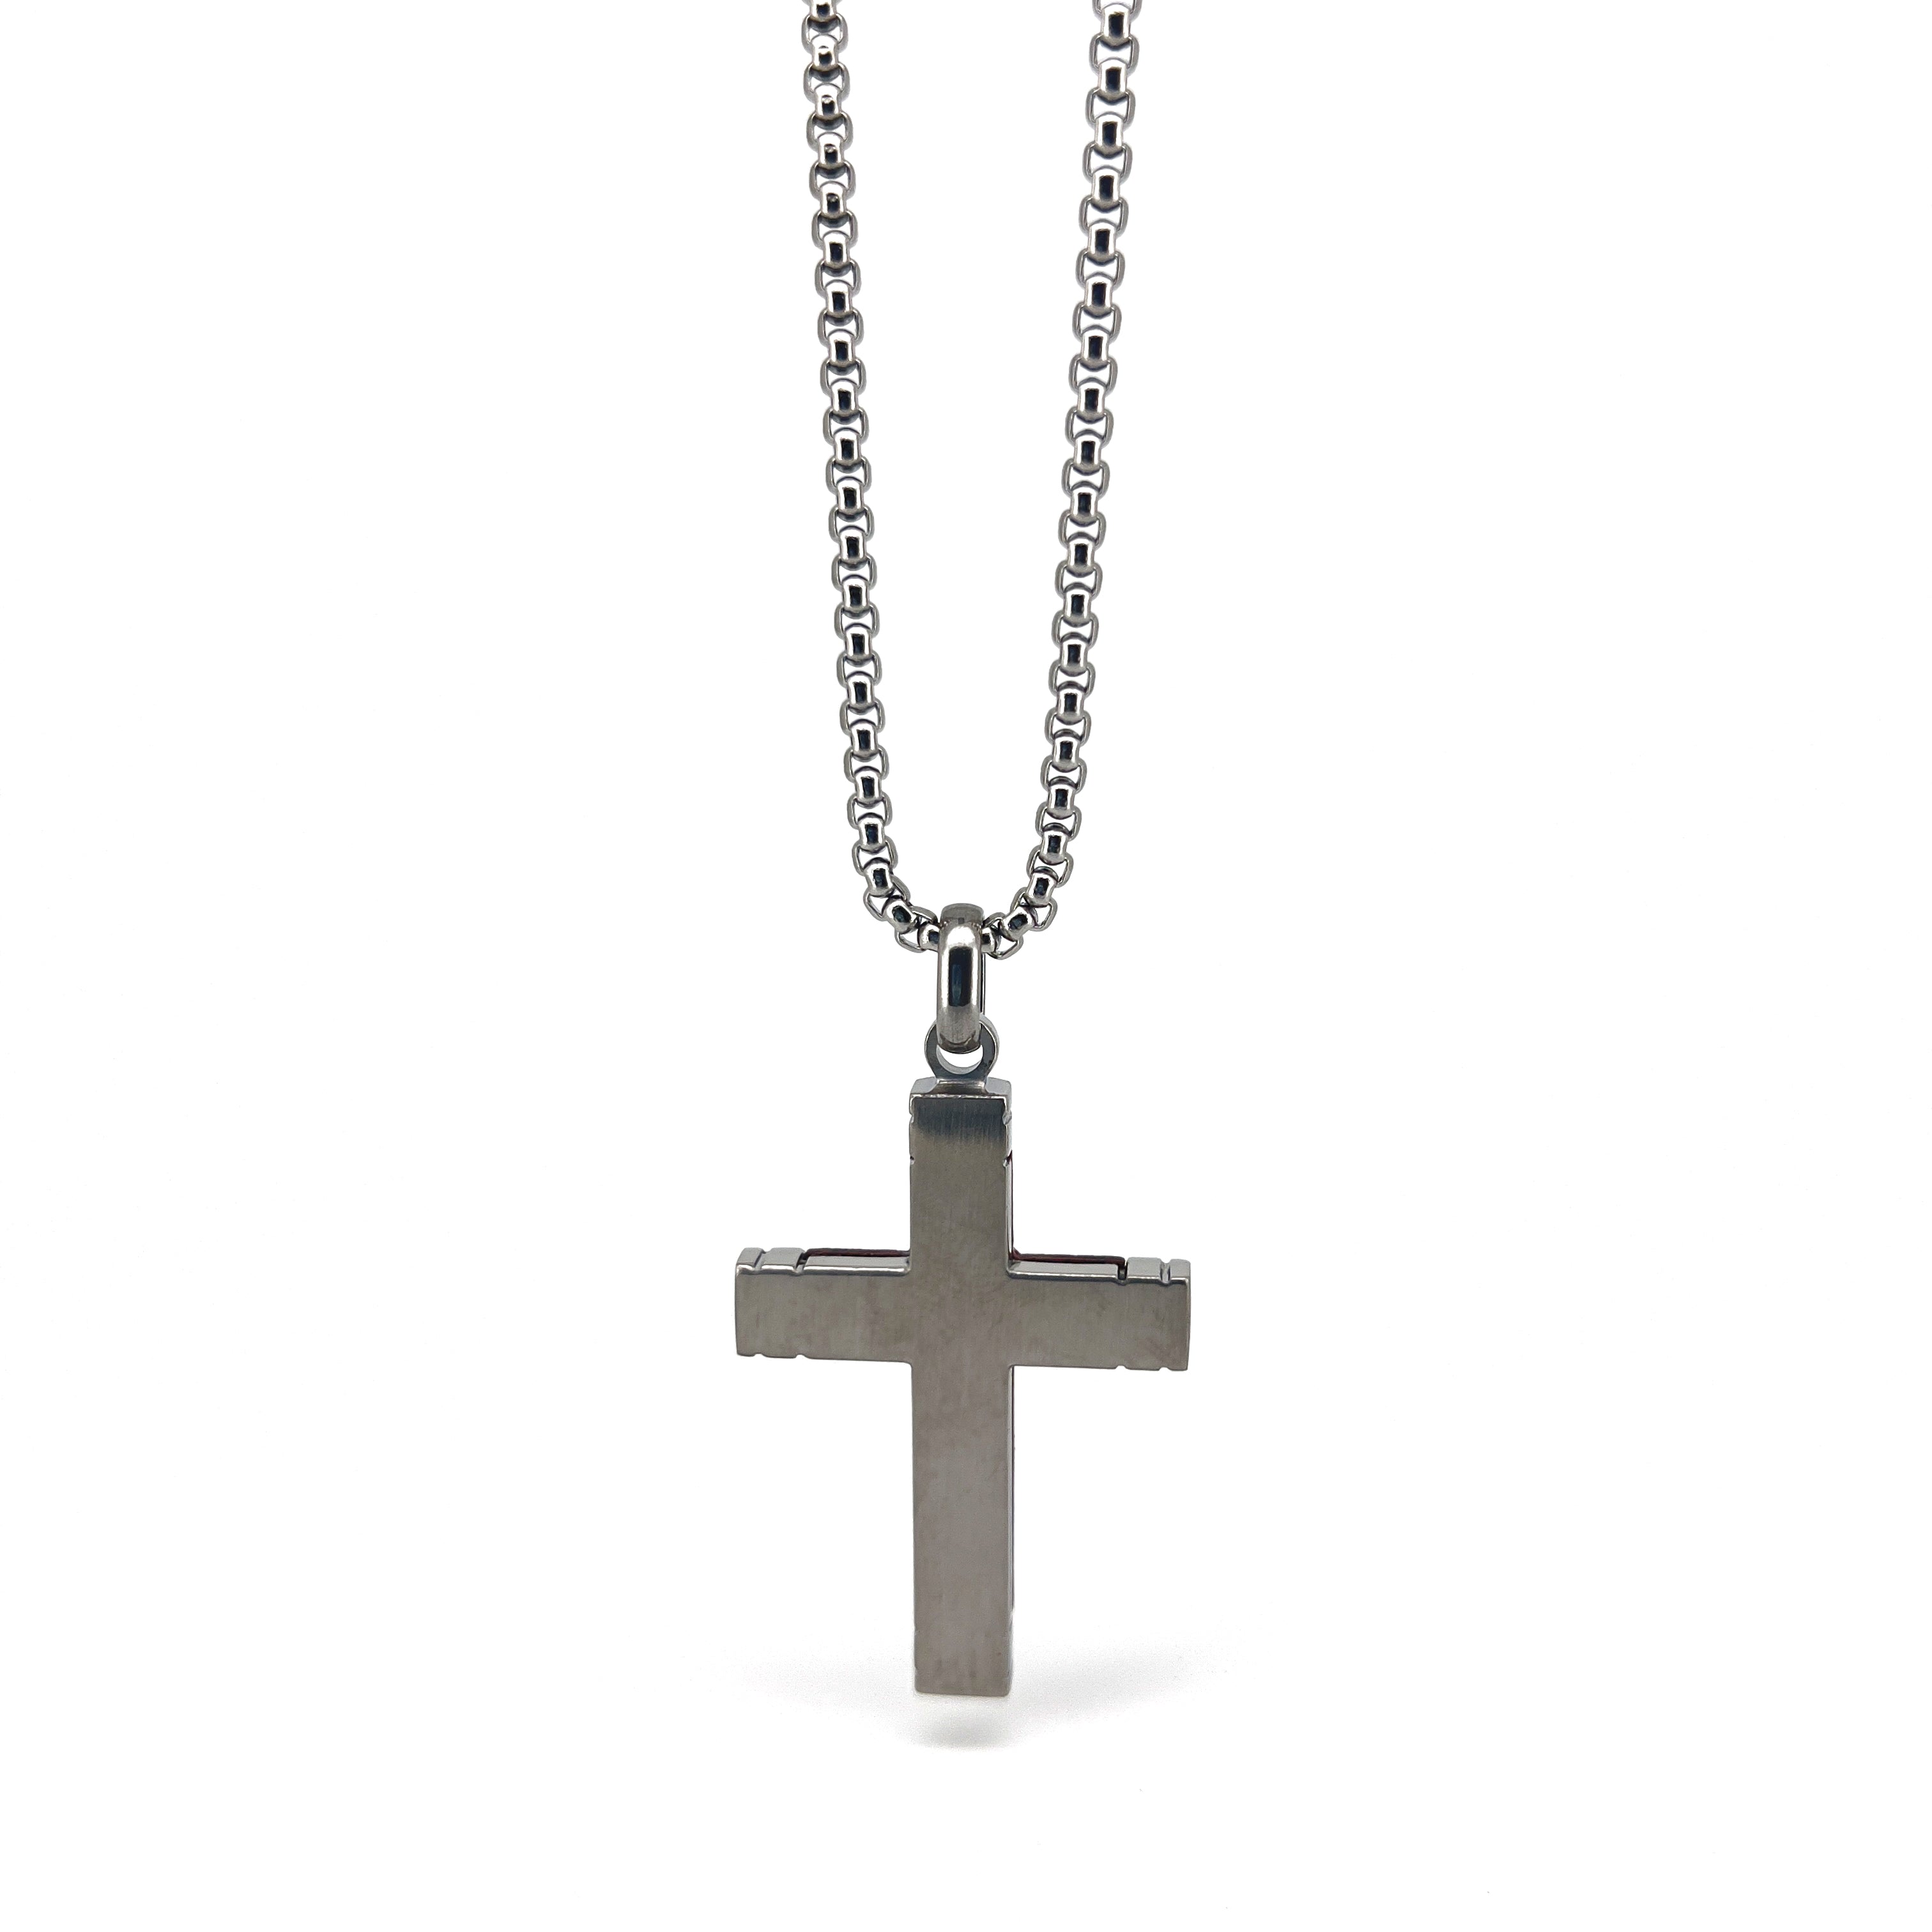 Eligio Stainless Steel Chain Necklace with Rosewood Crucifix